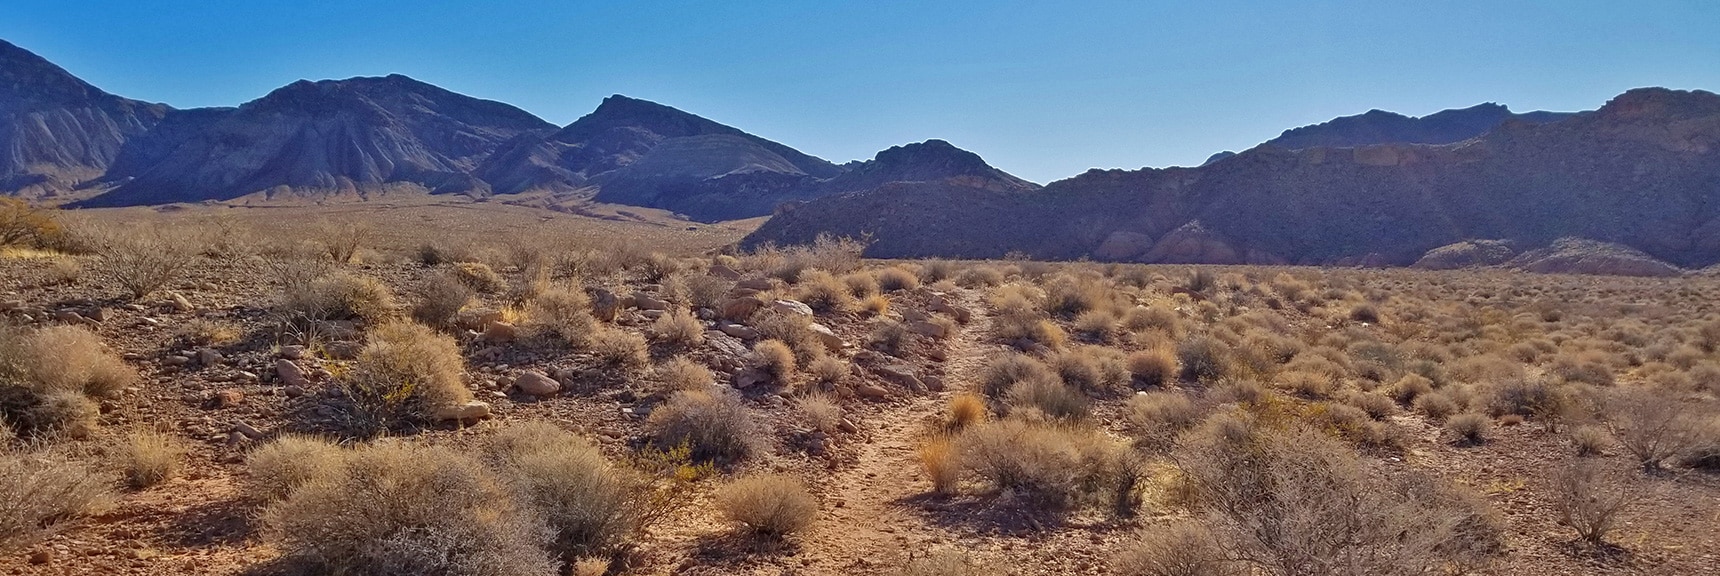 Bowl of Fire Trail in Excellent Condition, Looking Back Toward Trailhead | Bowl of Fire, Lake Mead National Recreation Area, Nevada